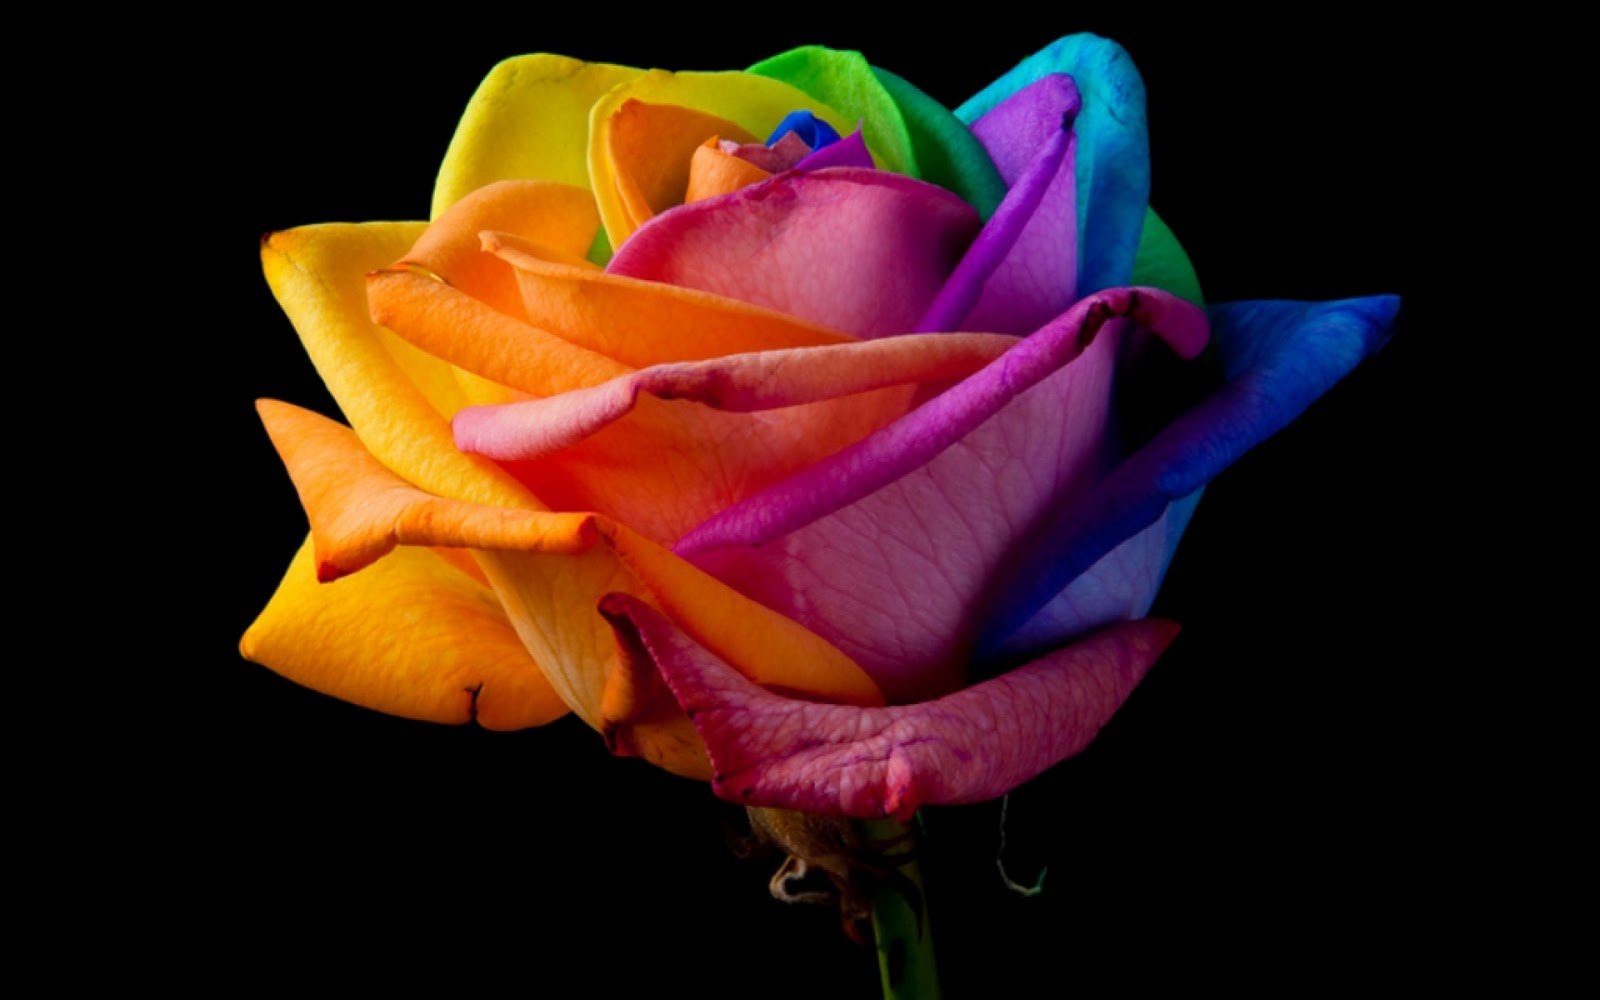 the rainbow rose is a rose which has had its petals artificially